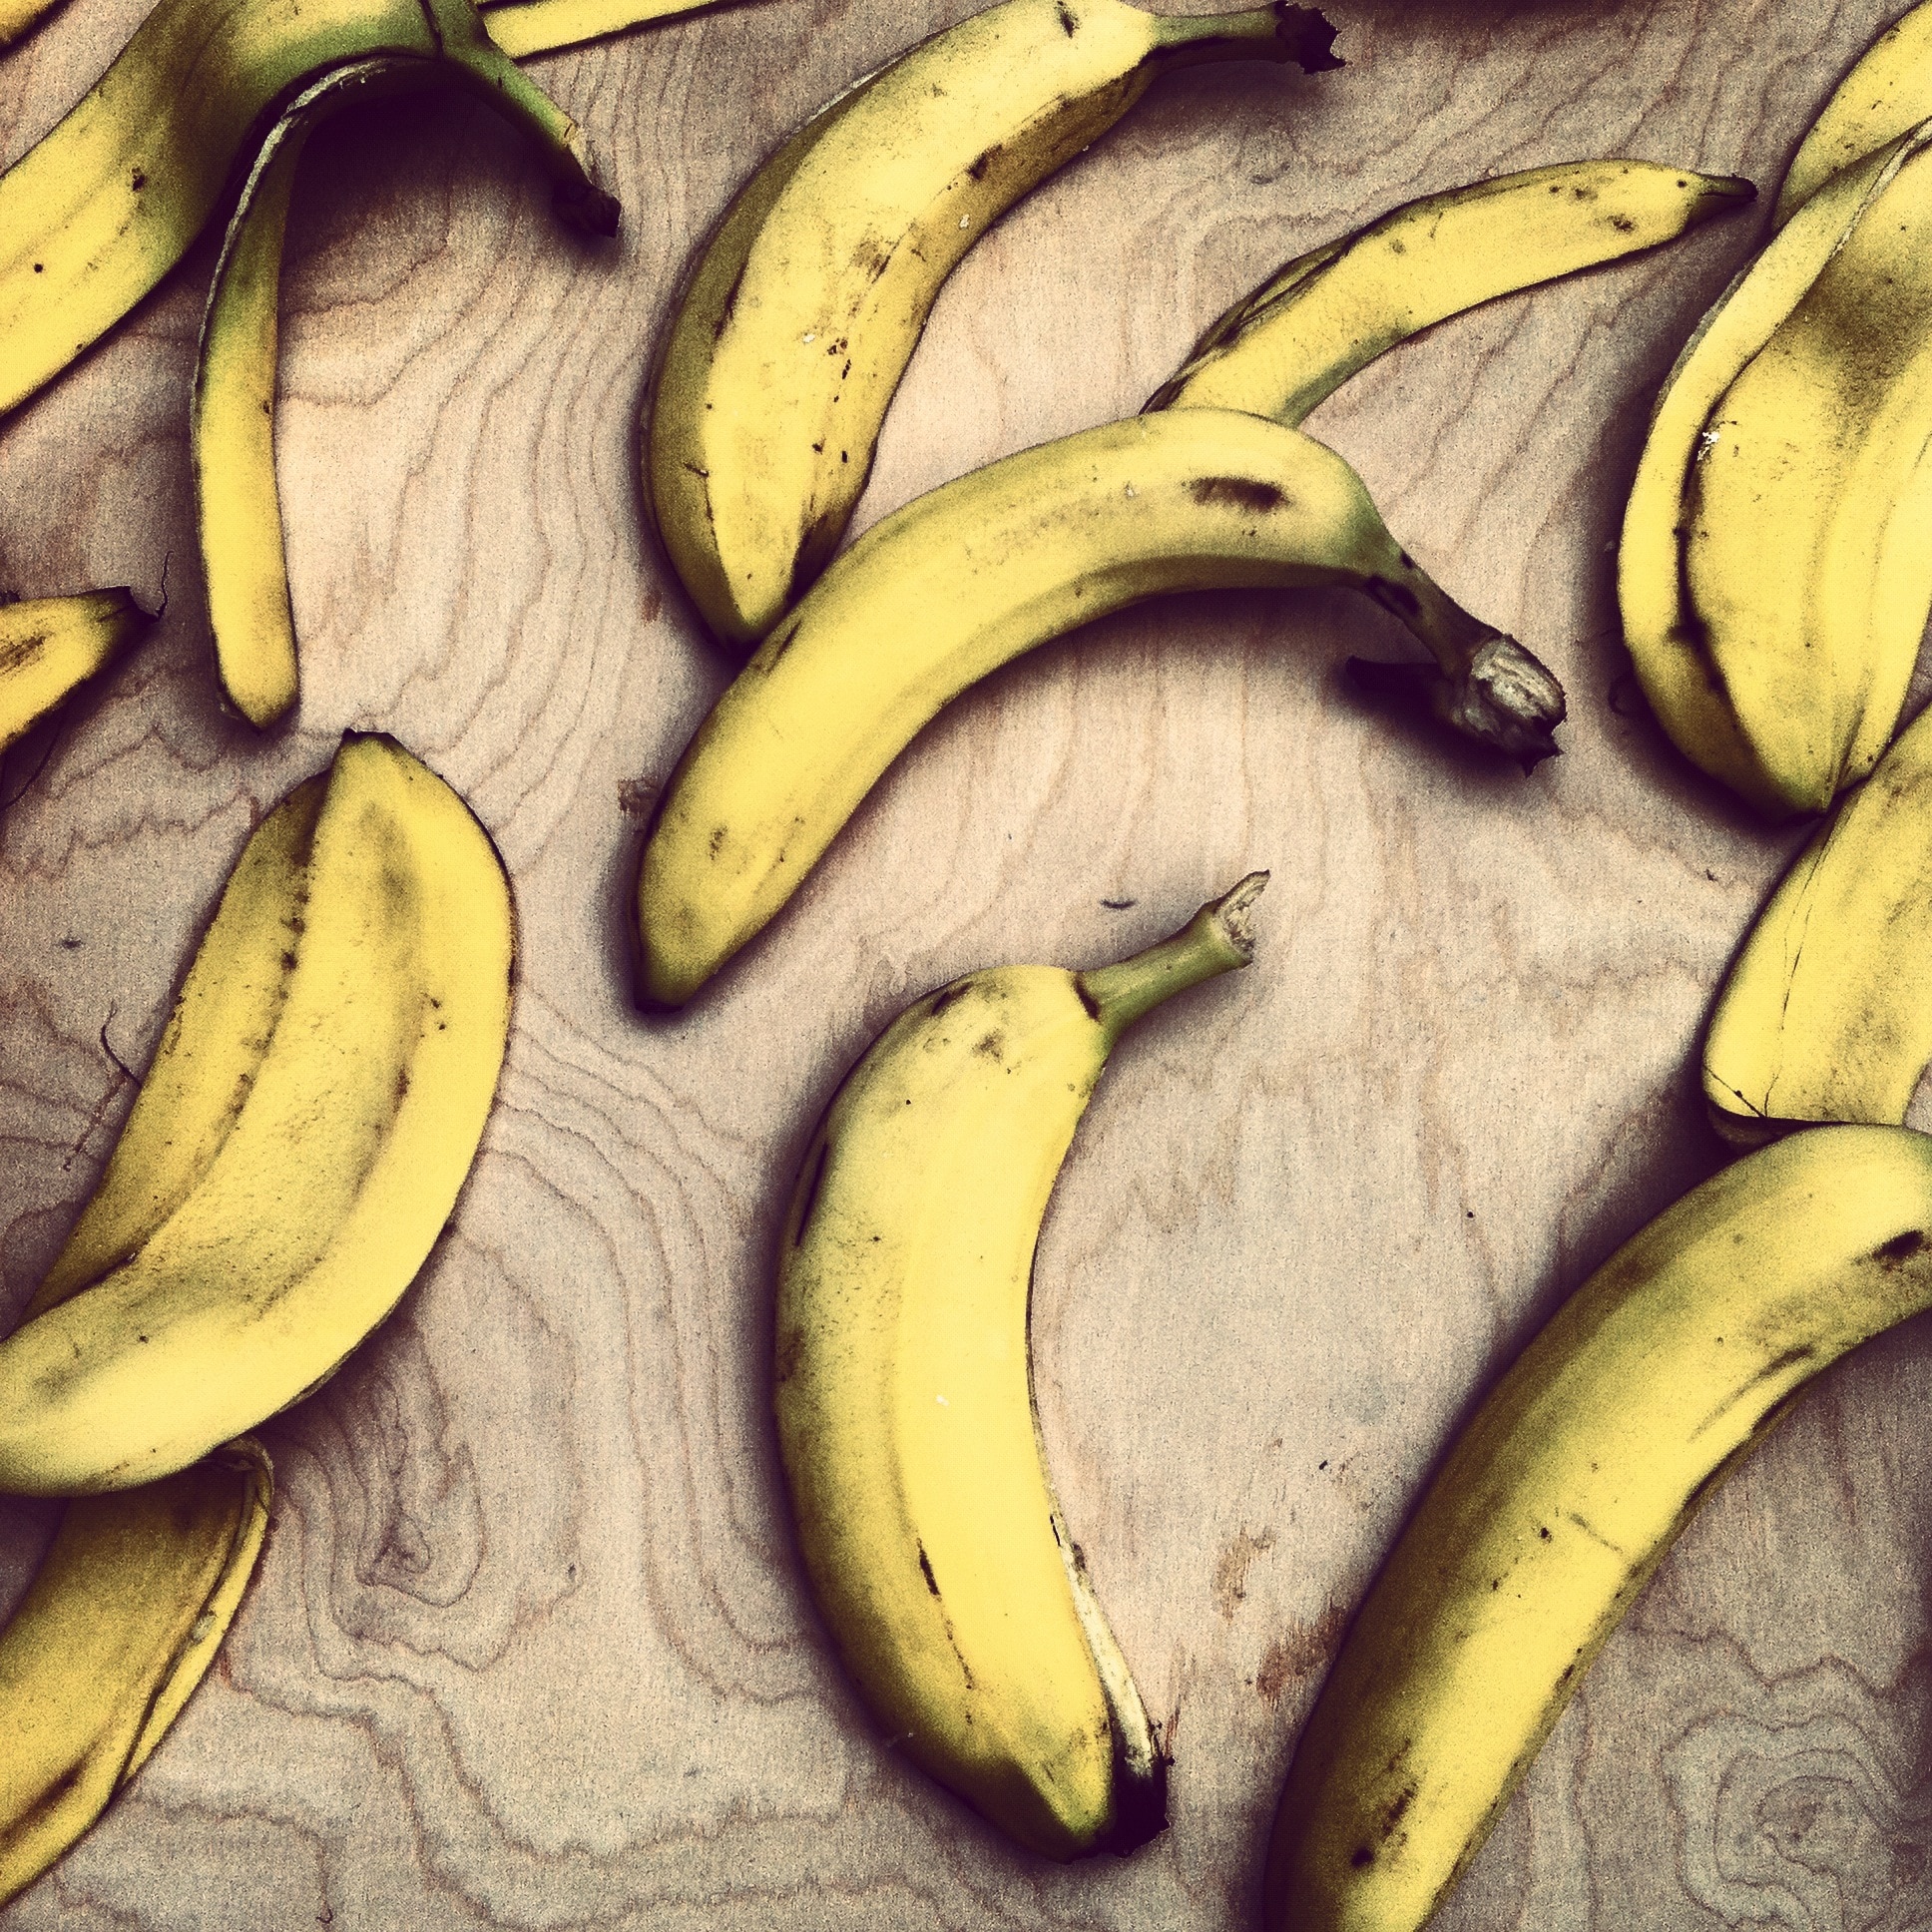 yellow bananas on top of brown wooden surface